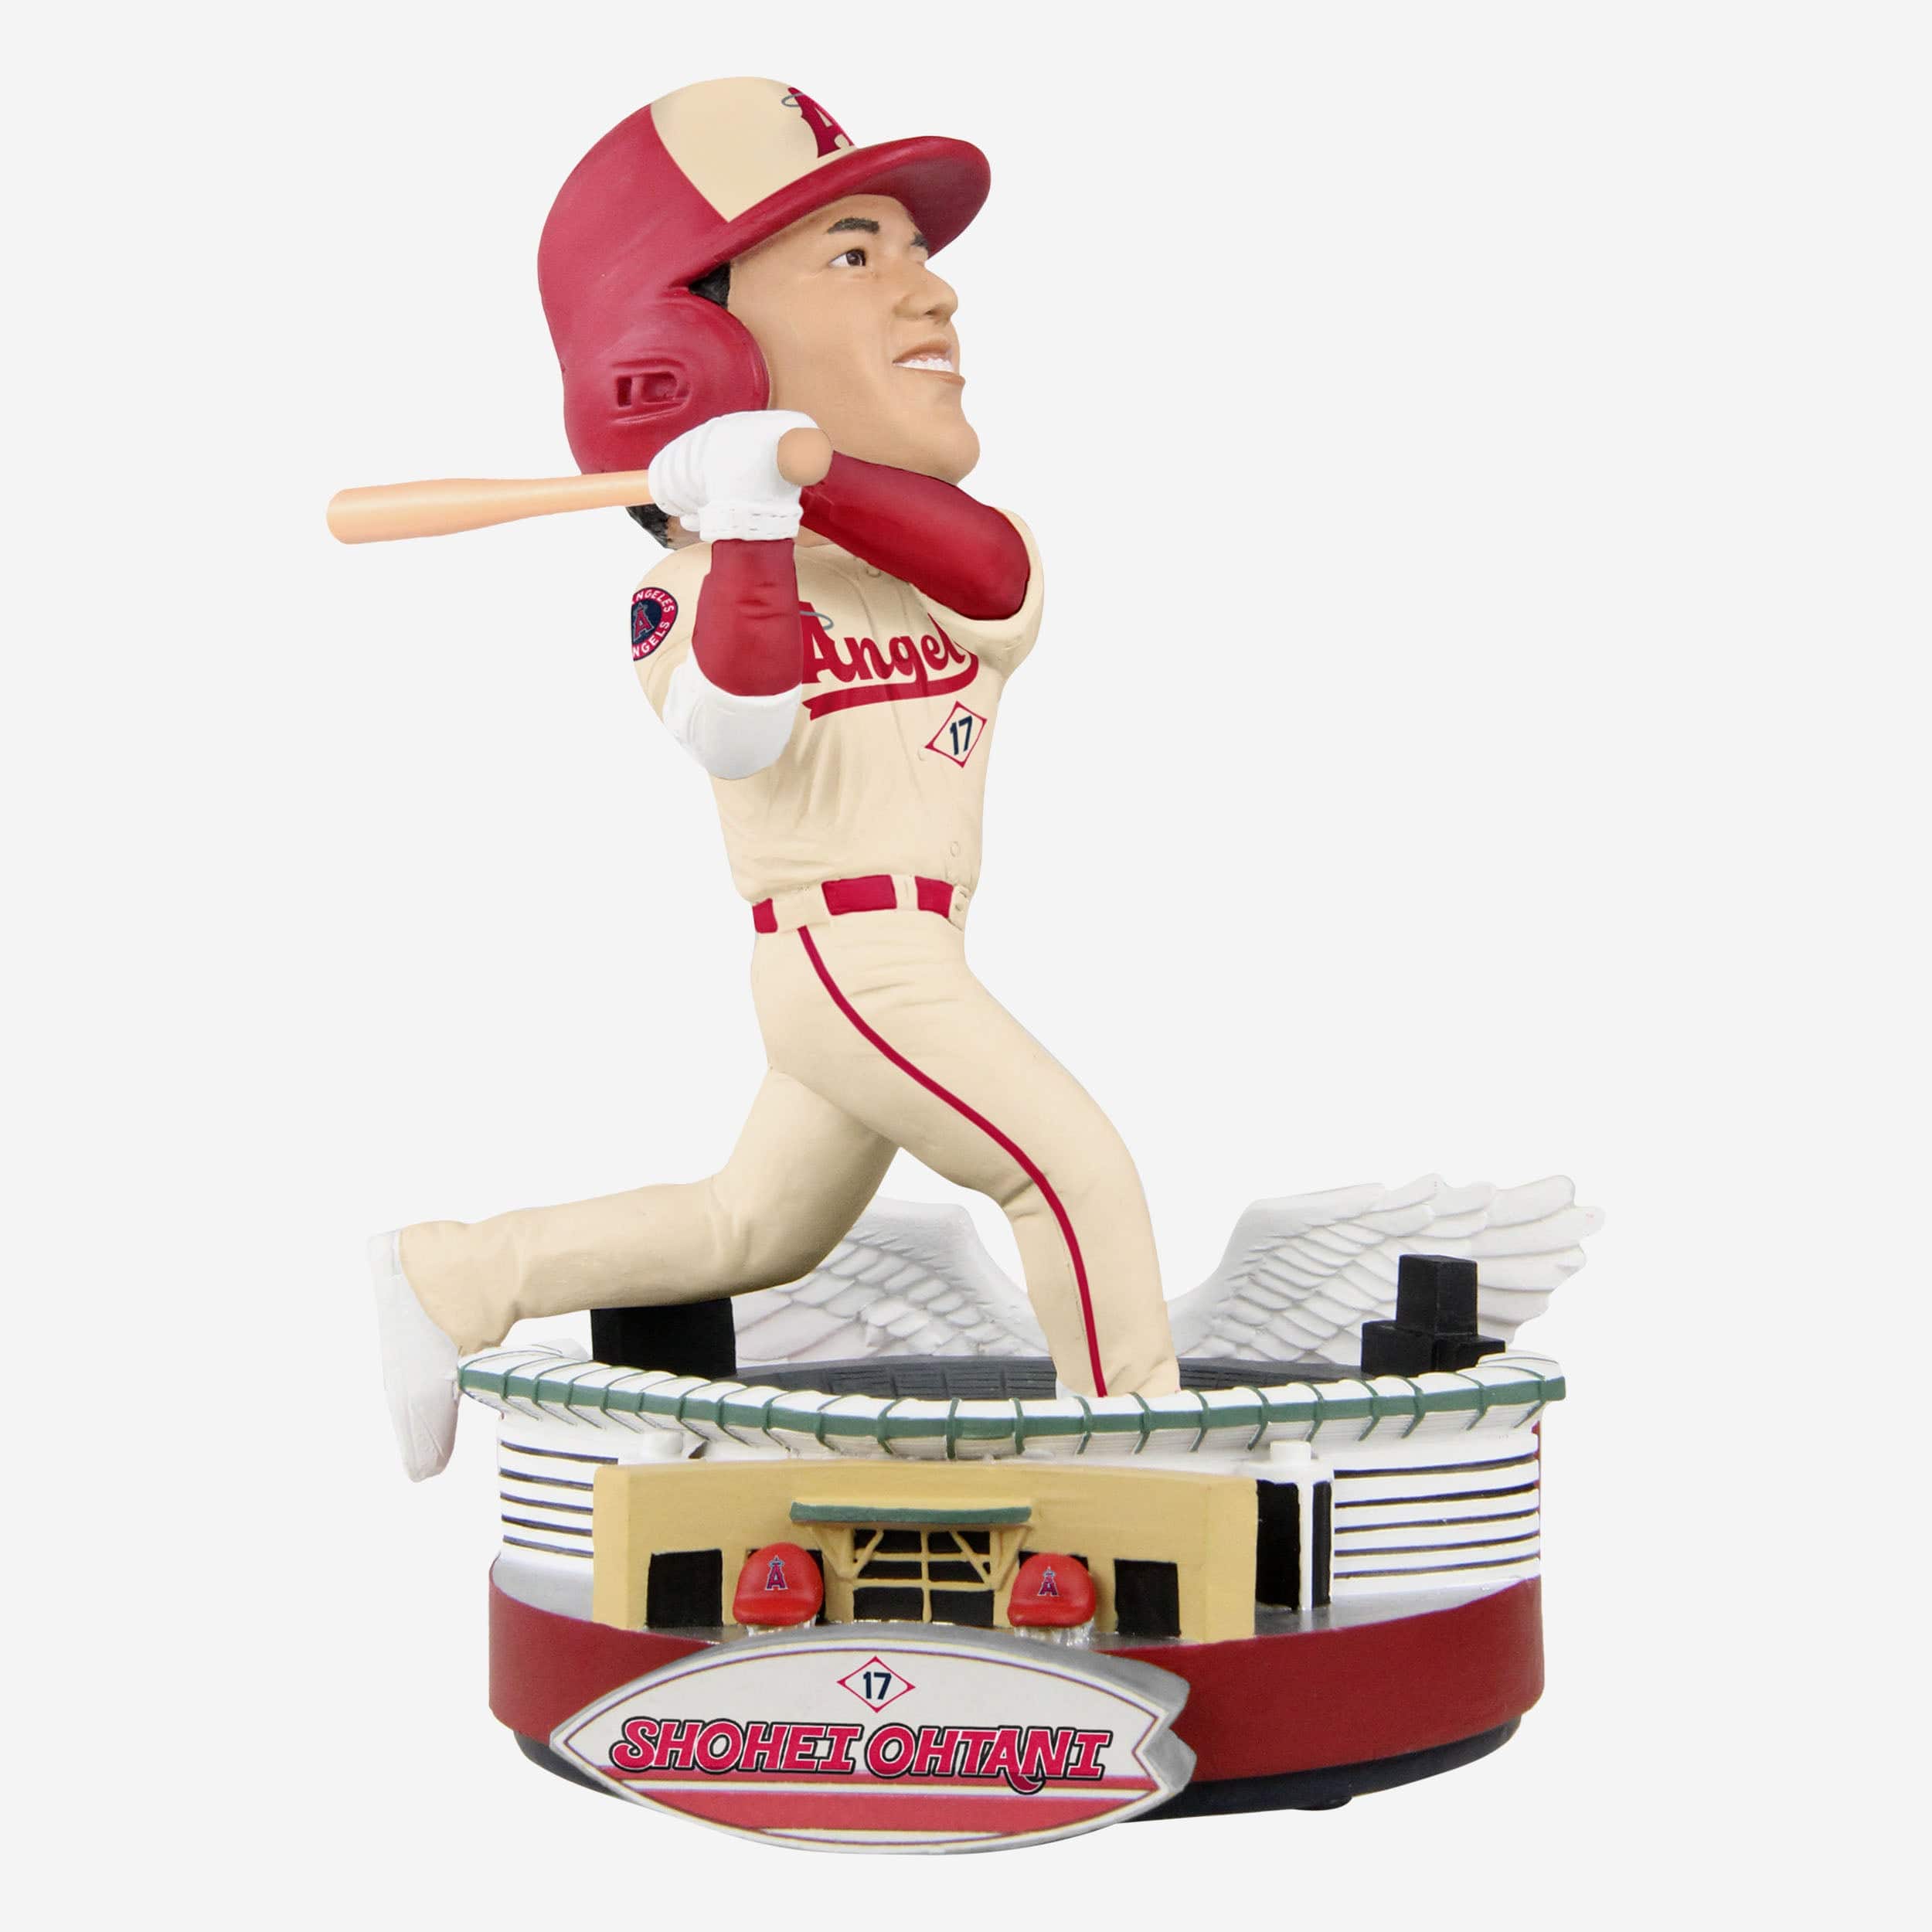 Shortest Stop on X: NEW BOBBLEHEAD ALERT CITY CONNECT THEMED TROUT, OHTANI,  AND SYNDERGAARD Edition size is 322 of each   #GoHalos #Ohtani #ShoheiOhtani #MikeTrout #SYNDERGAARD #ad   / X